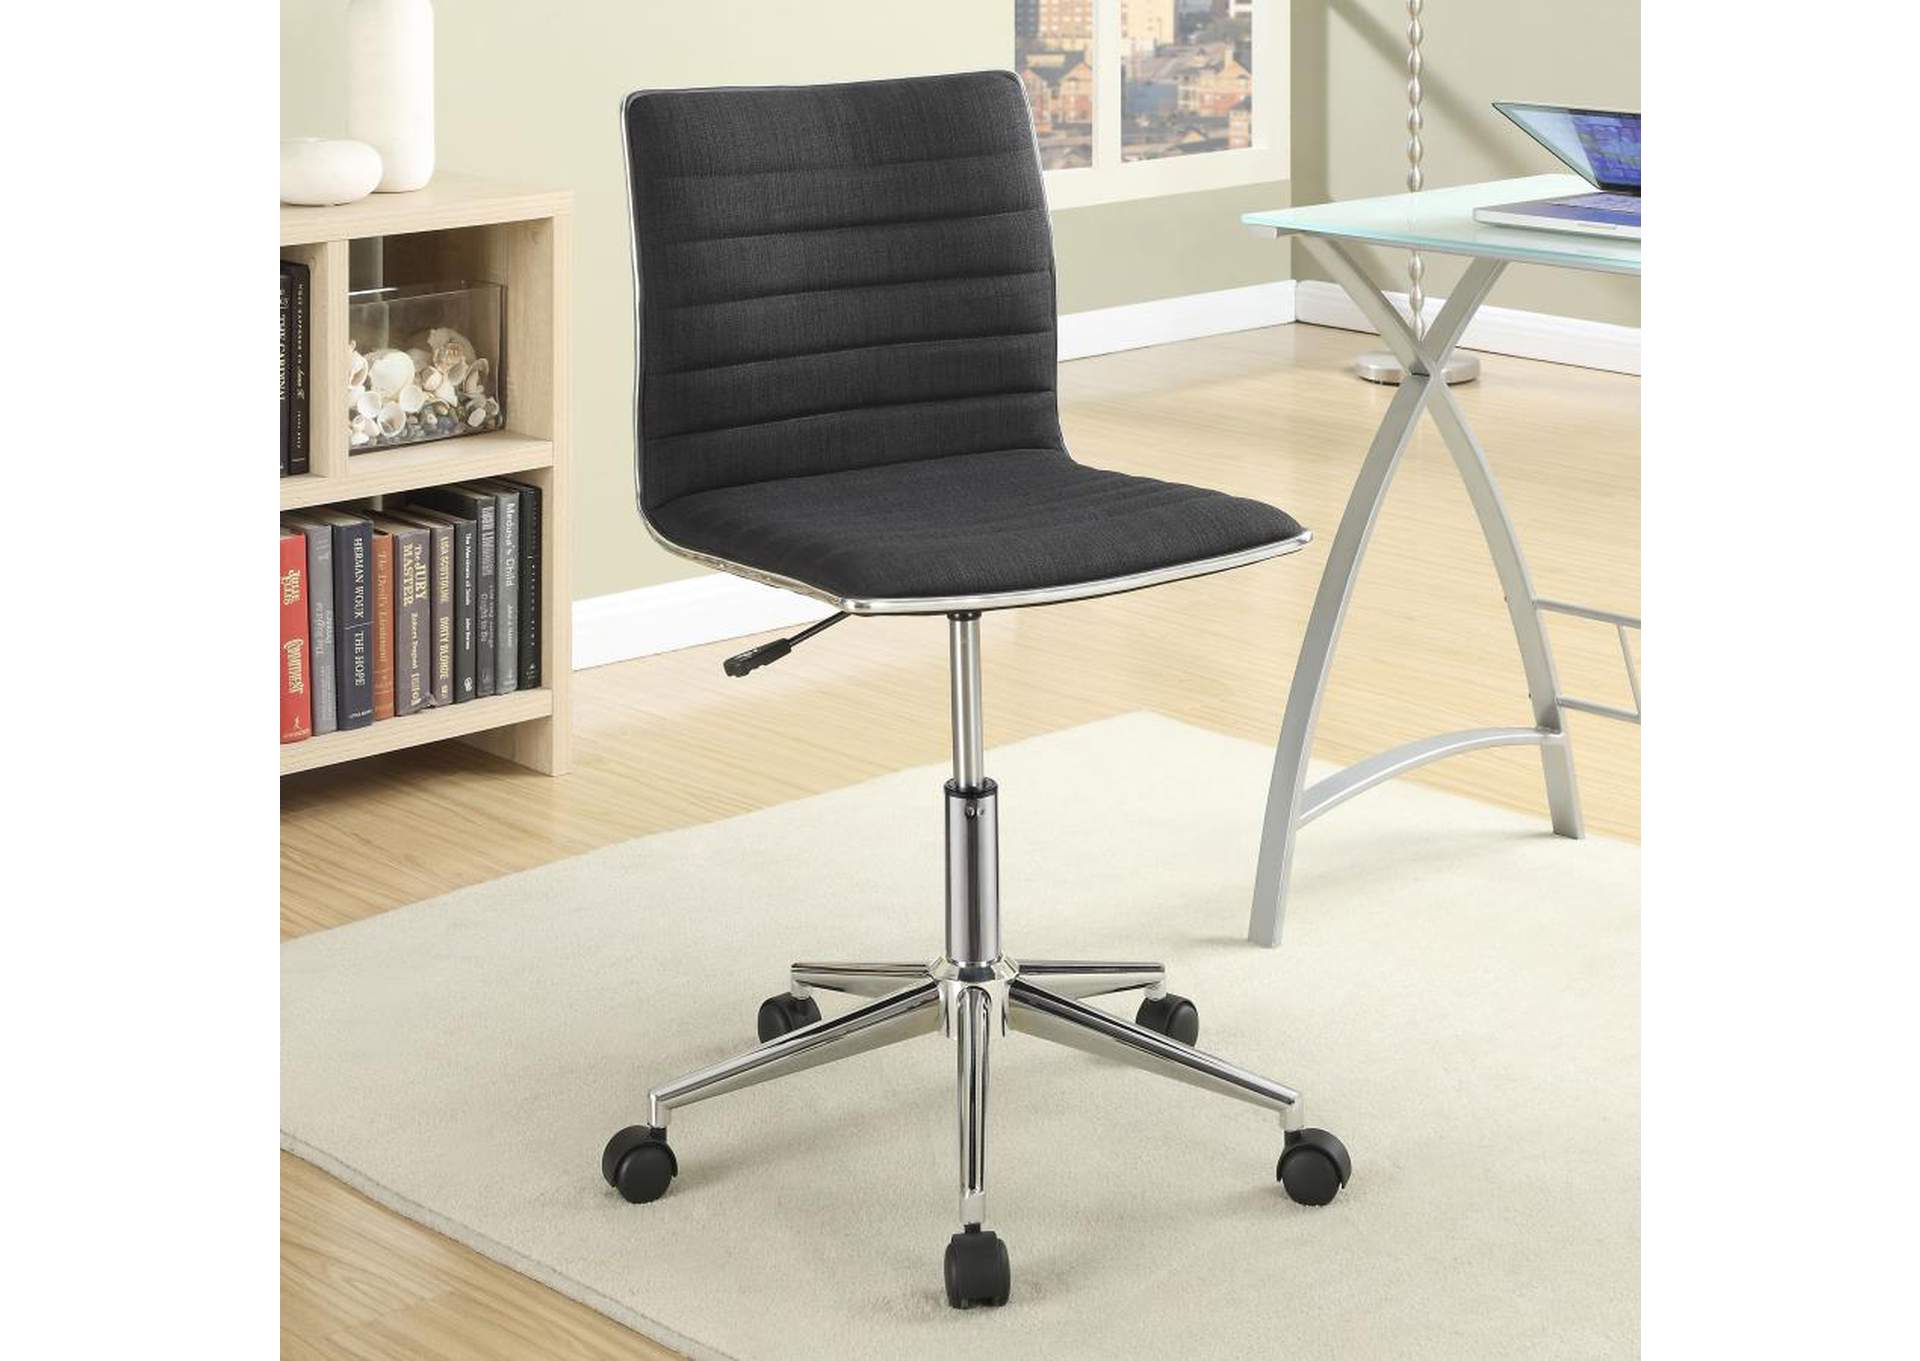 Chryses Adjustable Height Office Chair Black And Chrome,Coaster Furniture